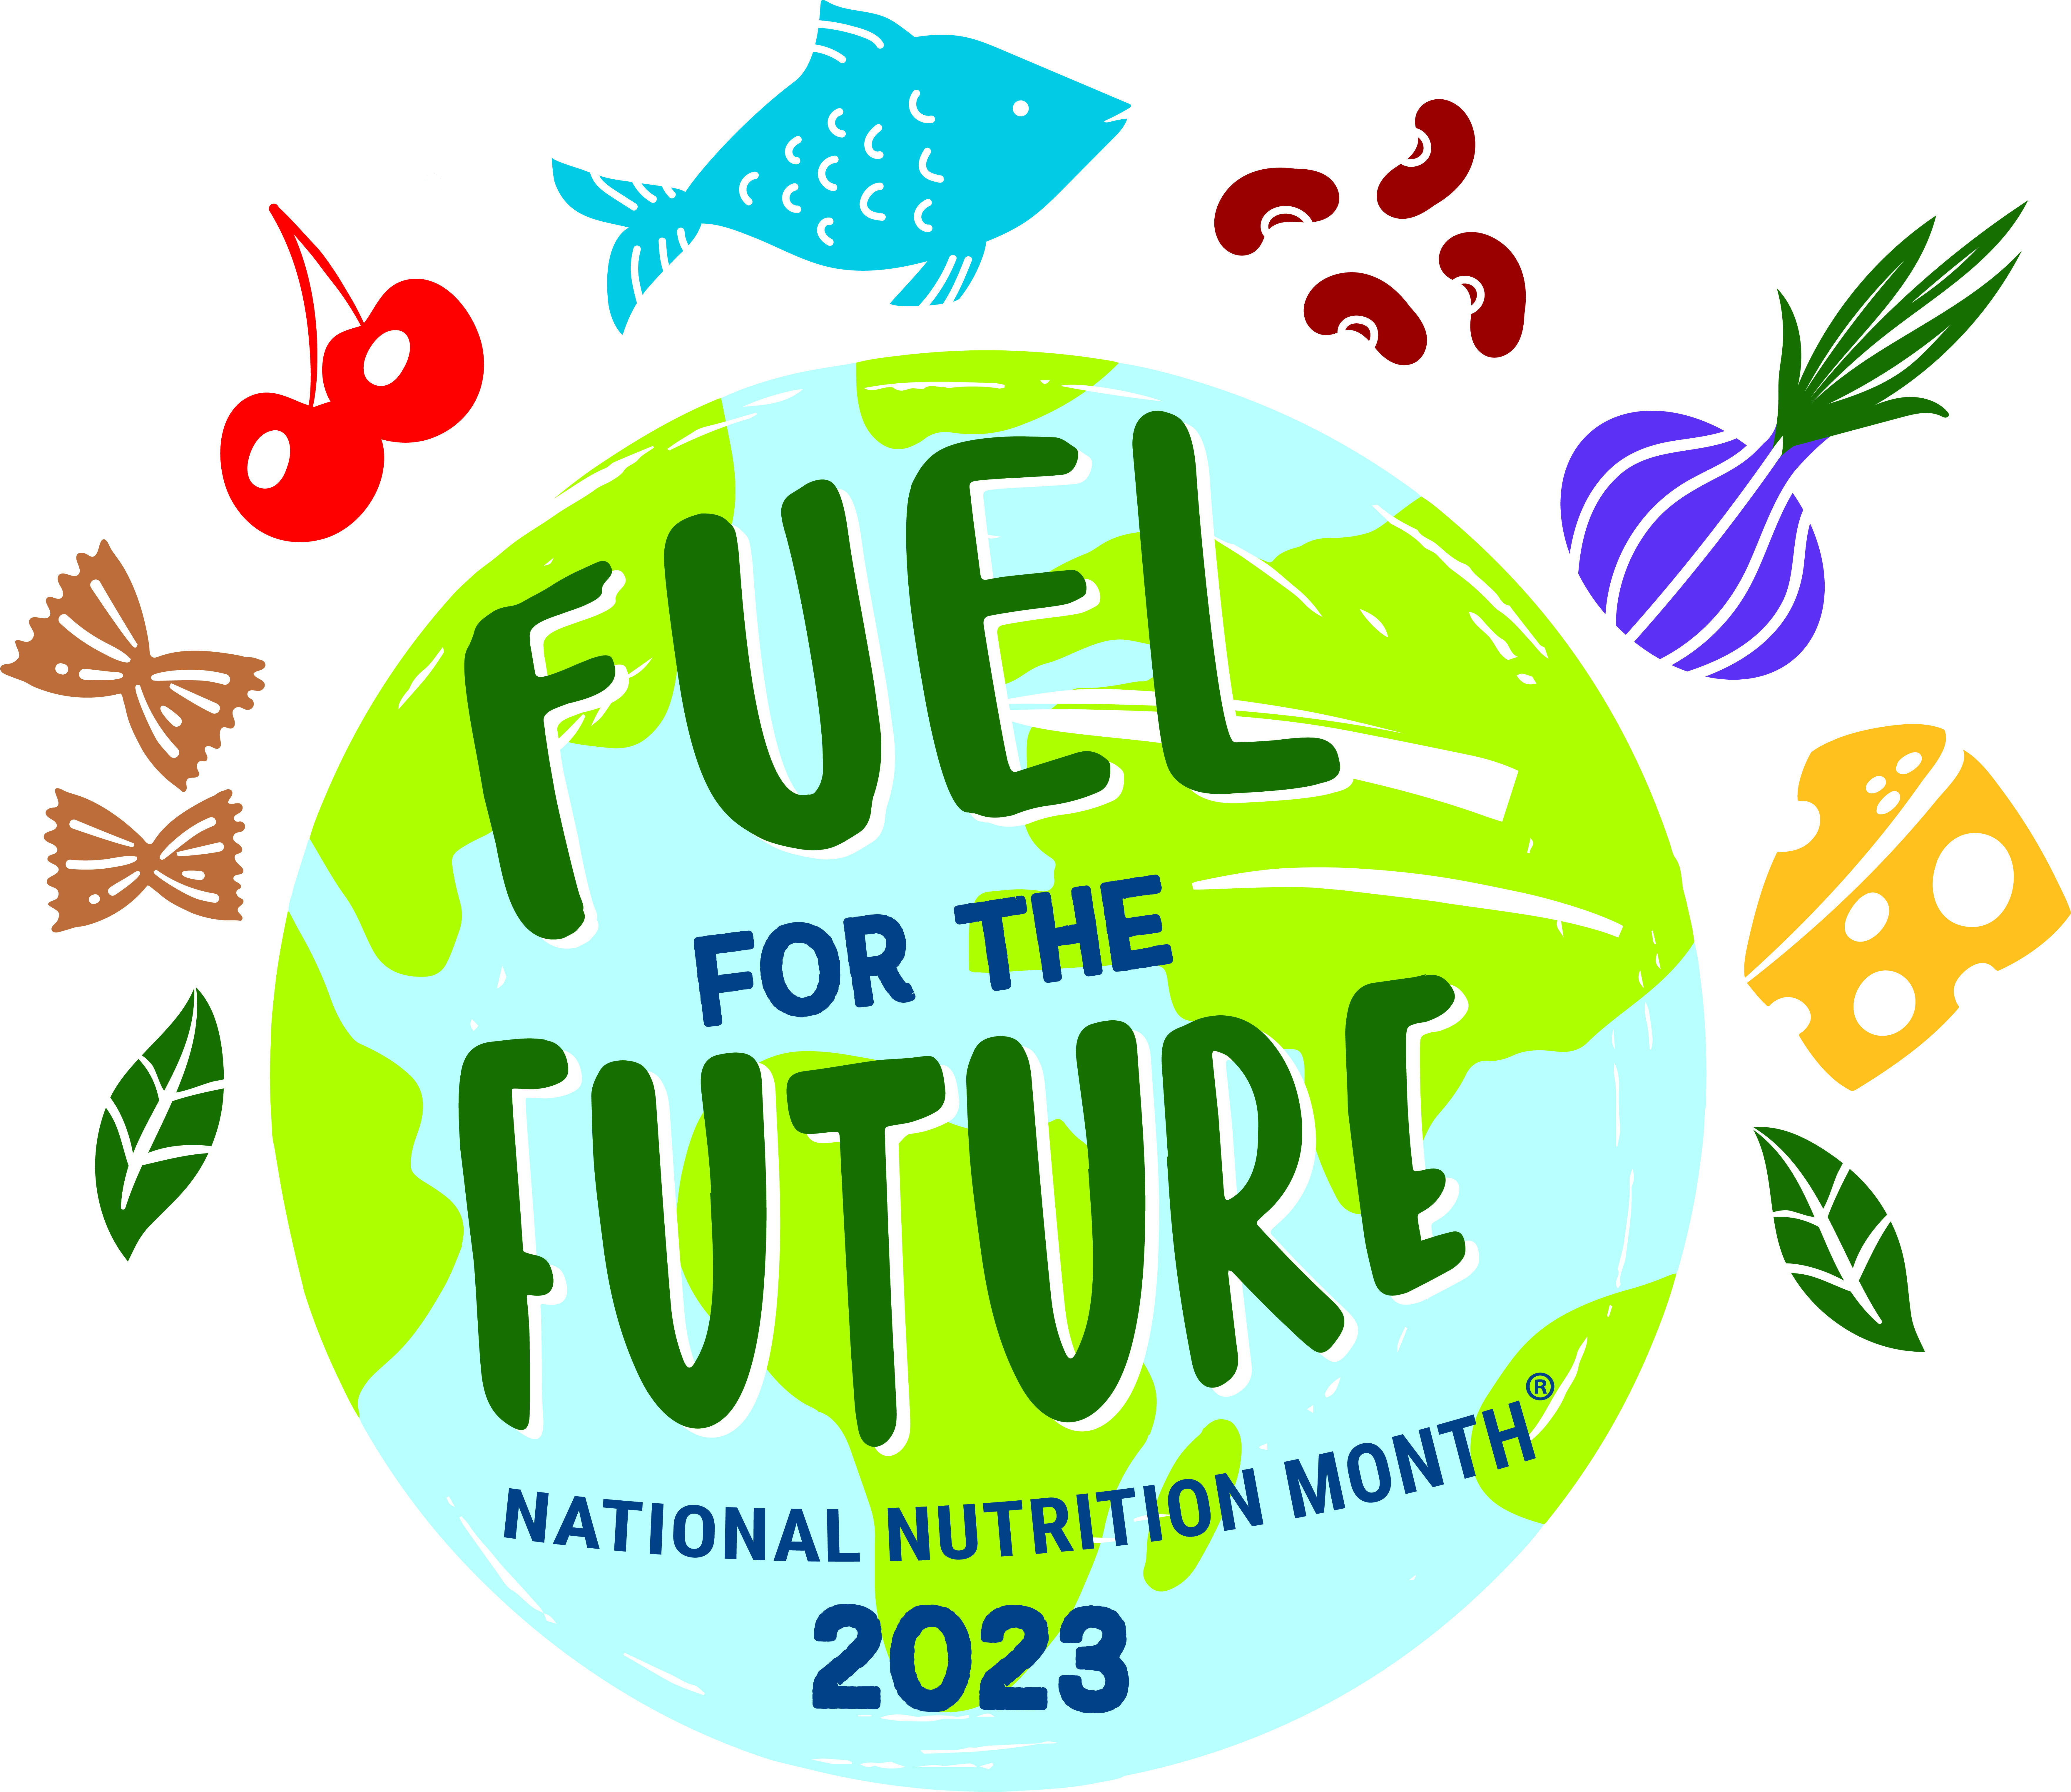 2023 Logo for National Nutrition Month "Fuel for the Future".